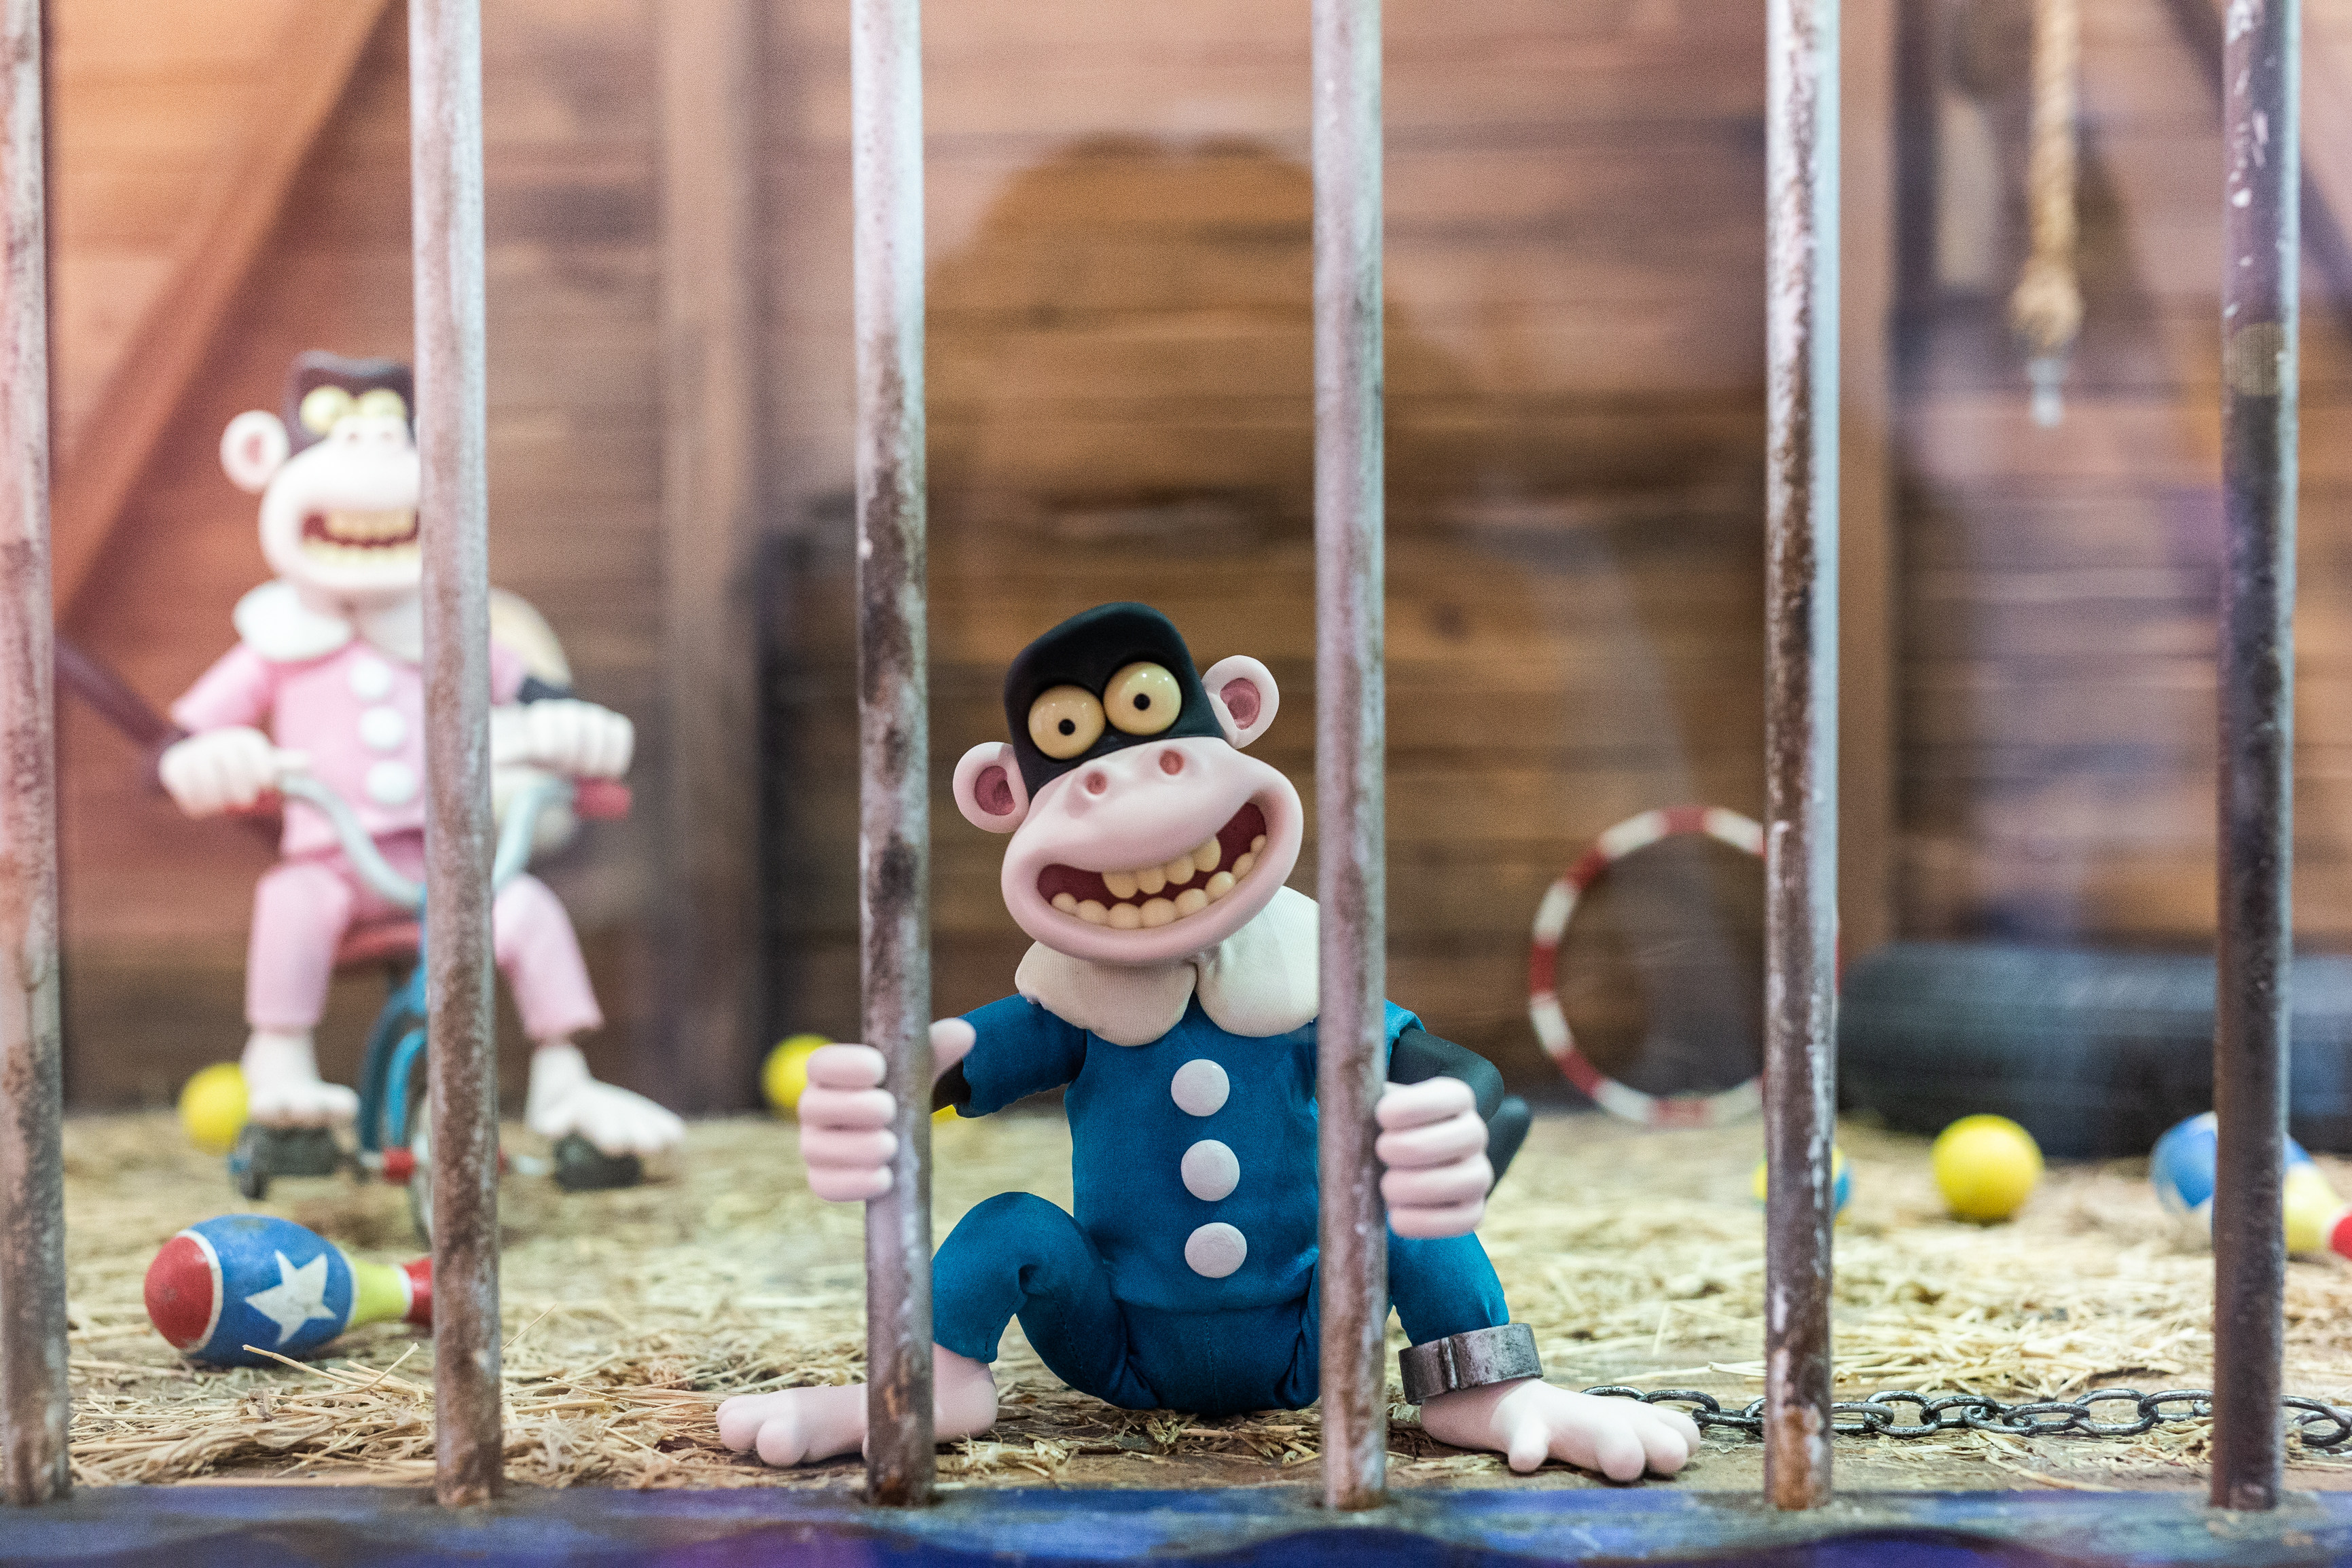 The International Museum of Comic Art in Villa Gavani in Pordenone, Northern Italy, is currently showing an exhibition on Aardman Animations, which can be seen alongside permanent exhibitions on the history of comic art. Photo: Paff!